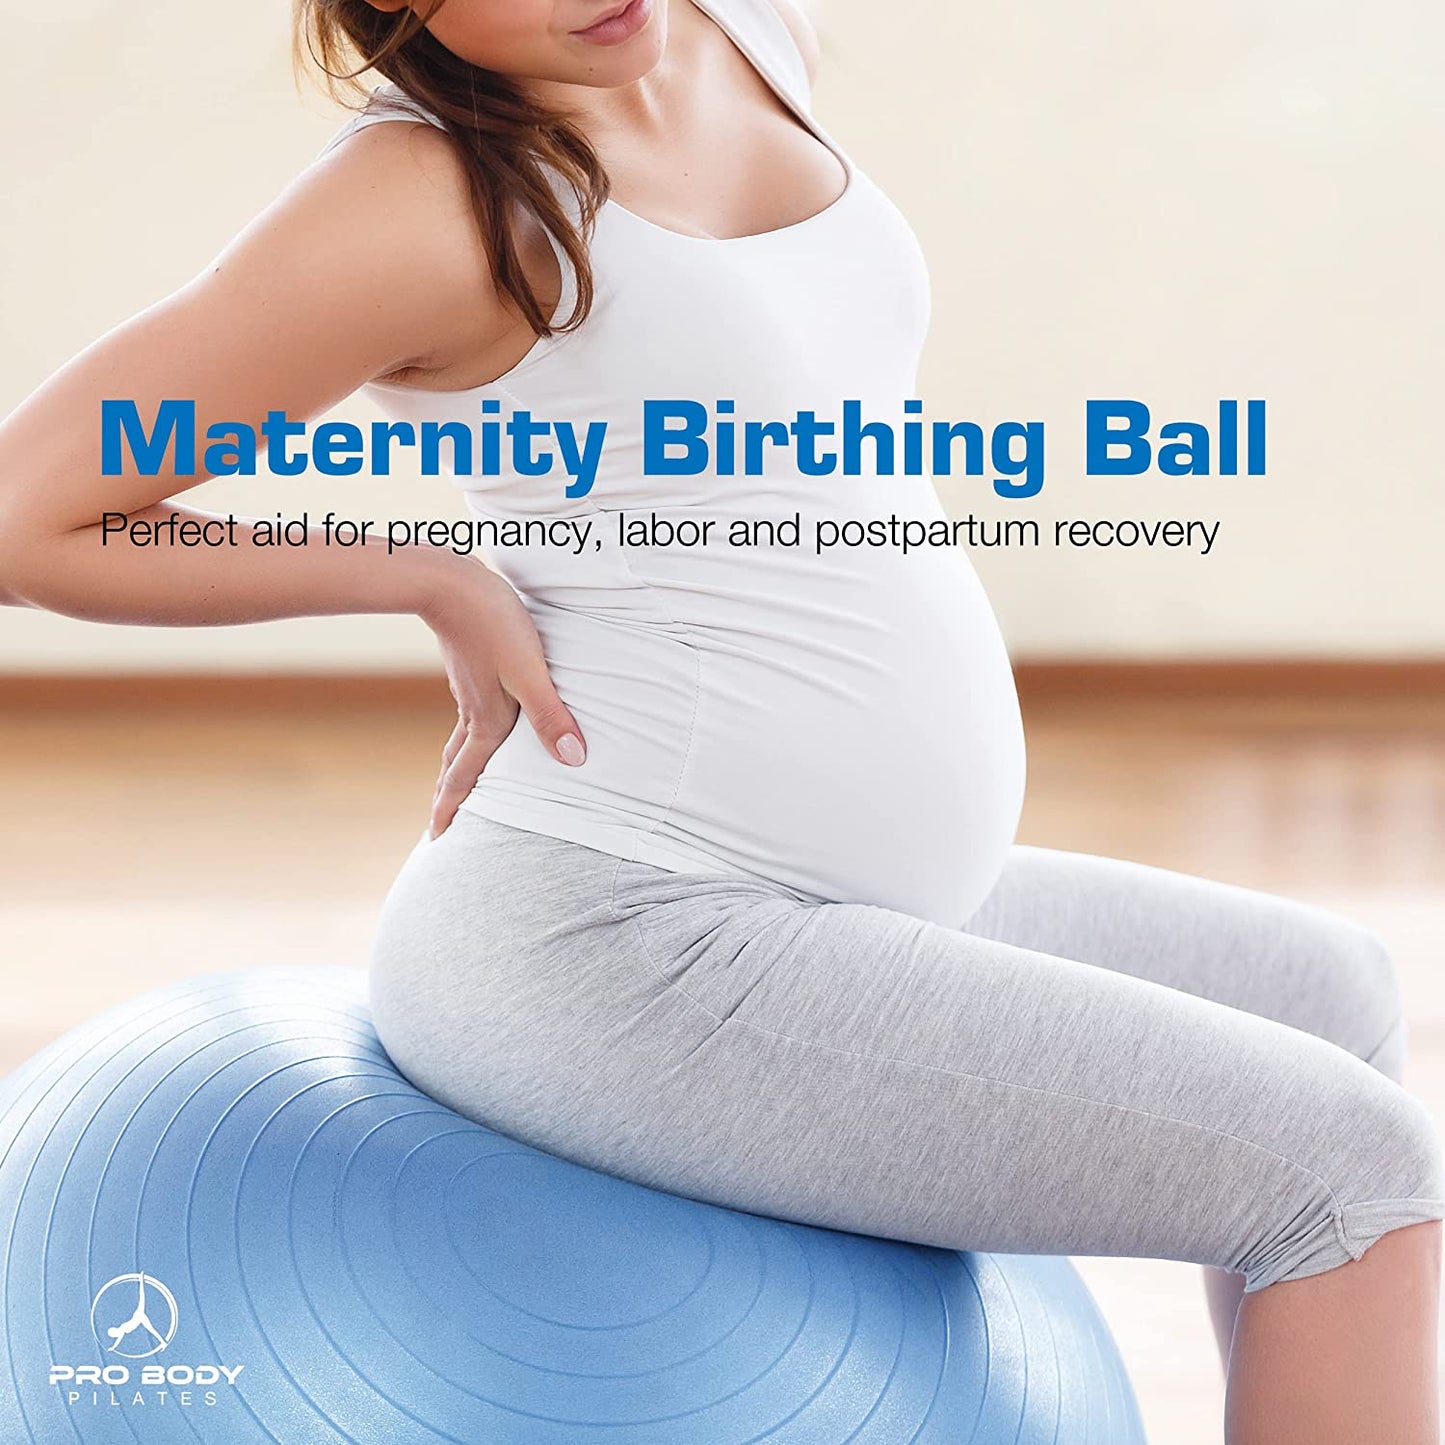 Yoga Ball for Pregnancy, Fitness, Balance, Workout at Home, Office and Physical Therapy (Sky)